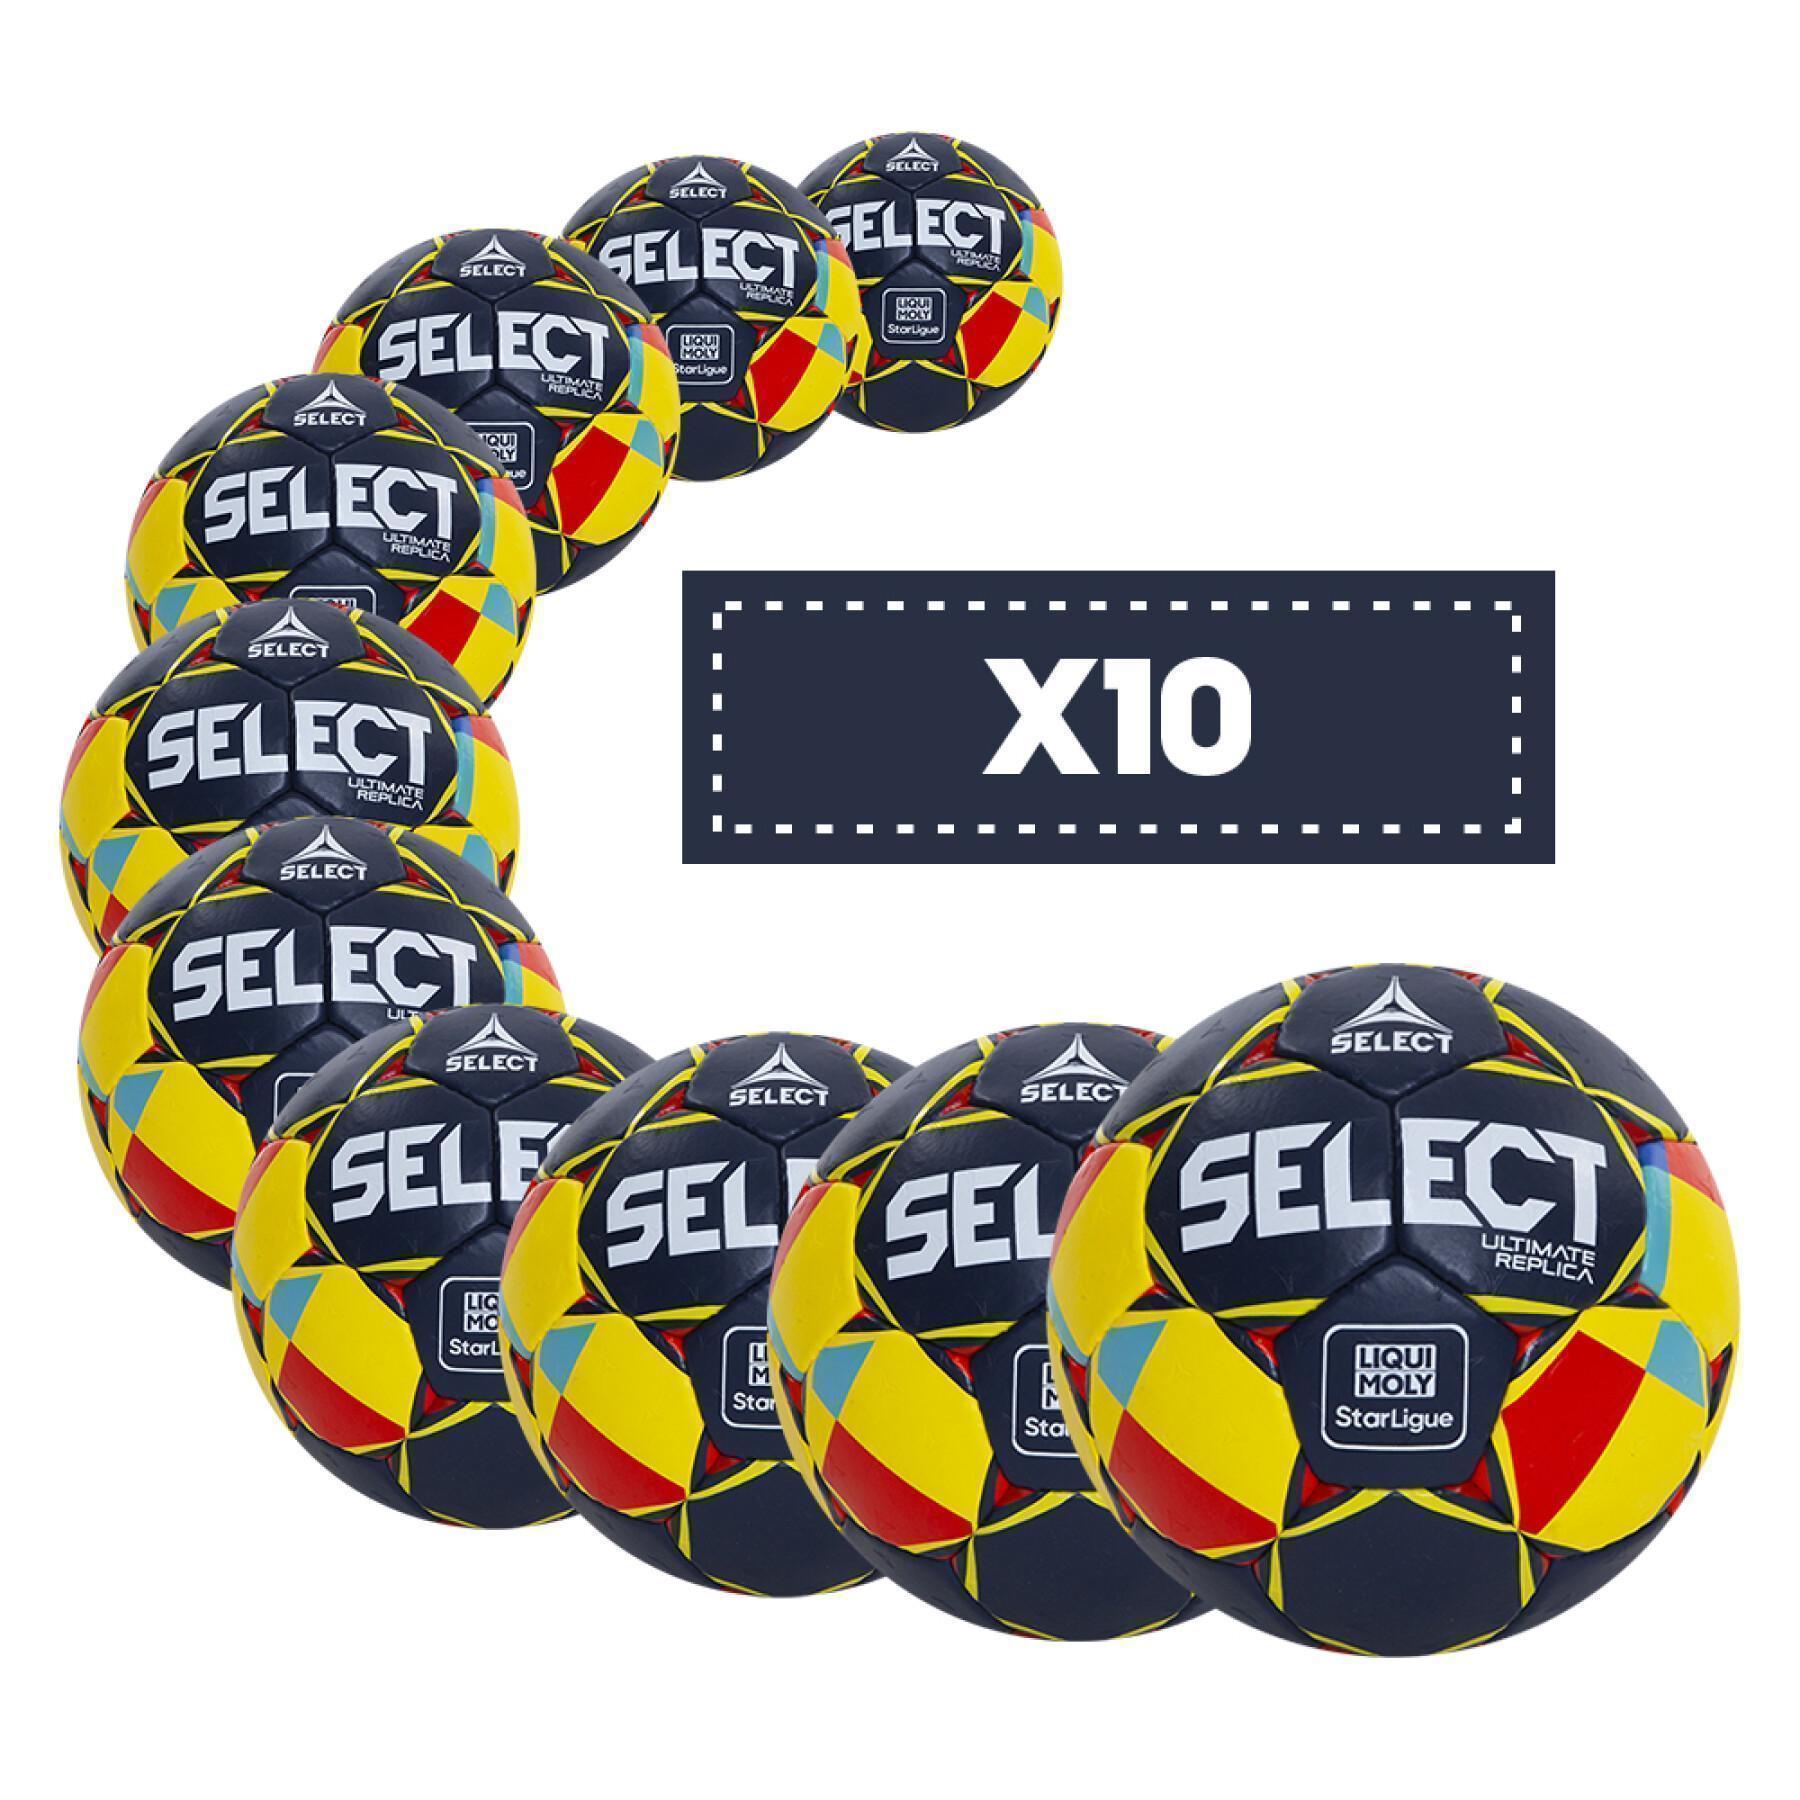 Pack of 10 balloons Select Ultimate LNH Replica 2021/22